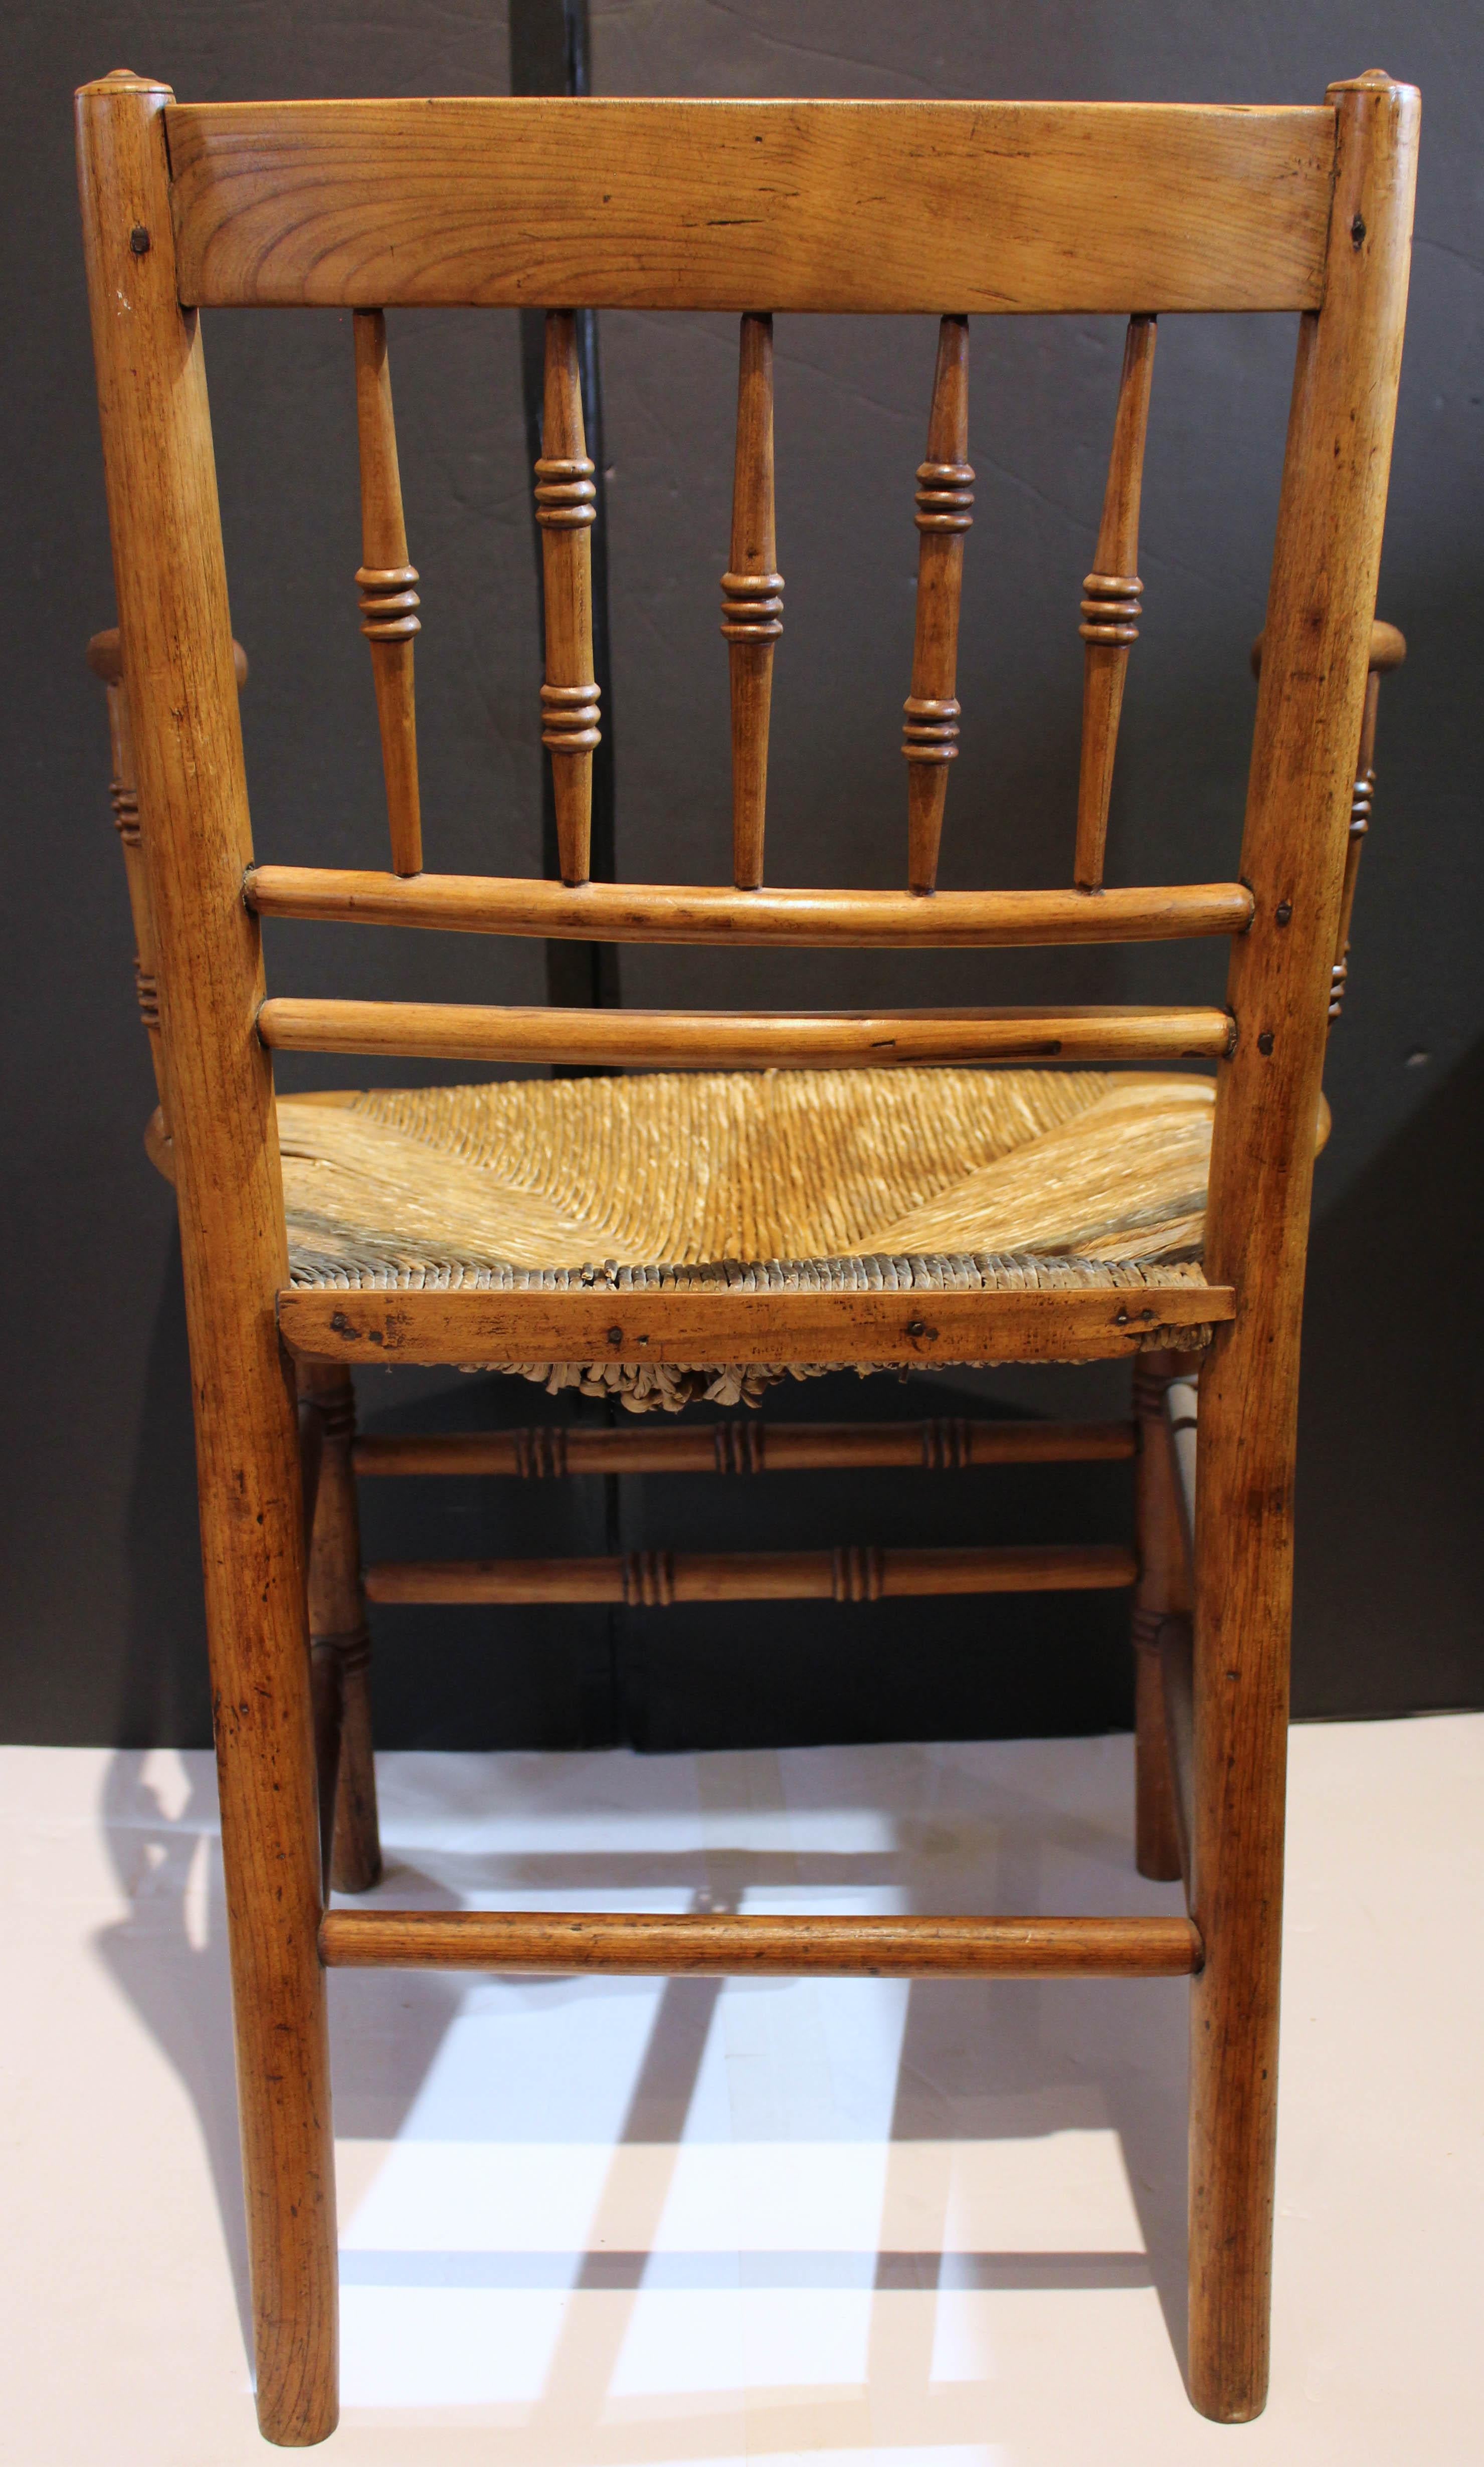 Rustic Early 19th Century Fruitwood Arm Chair, English